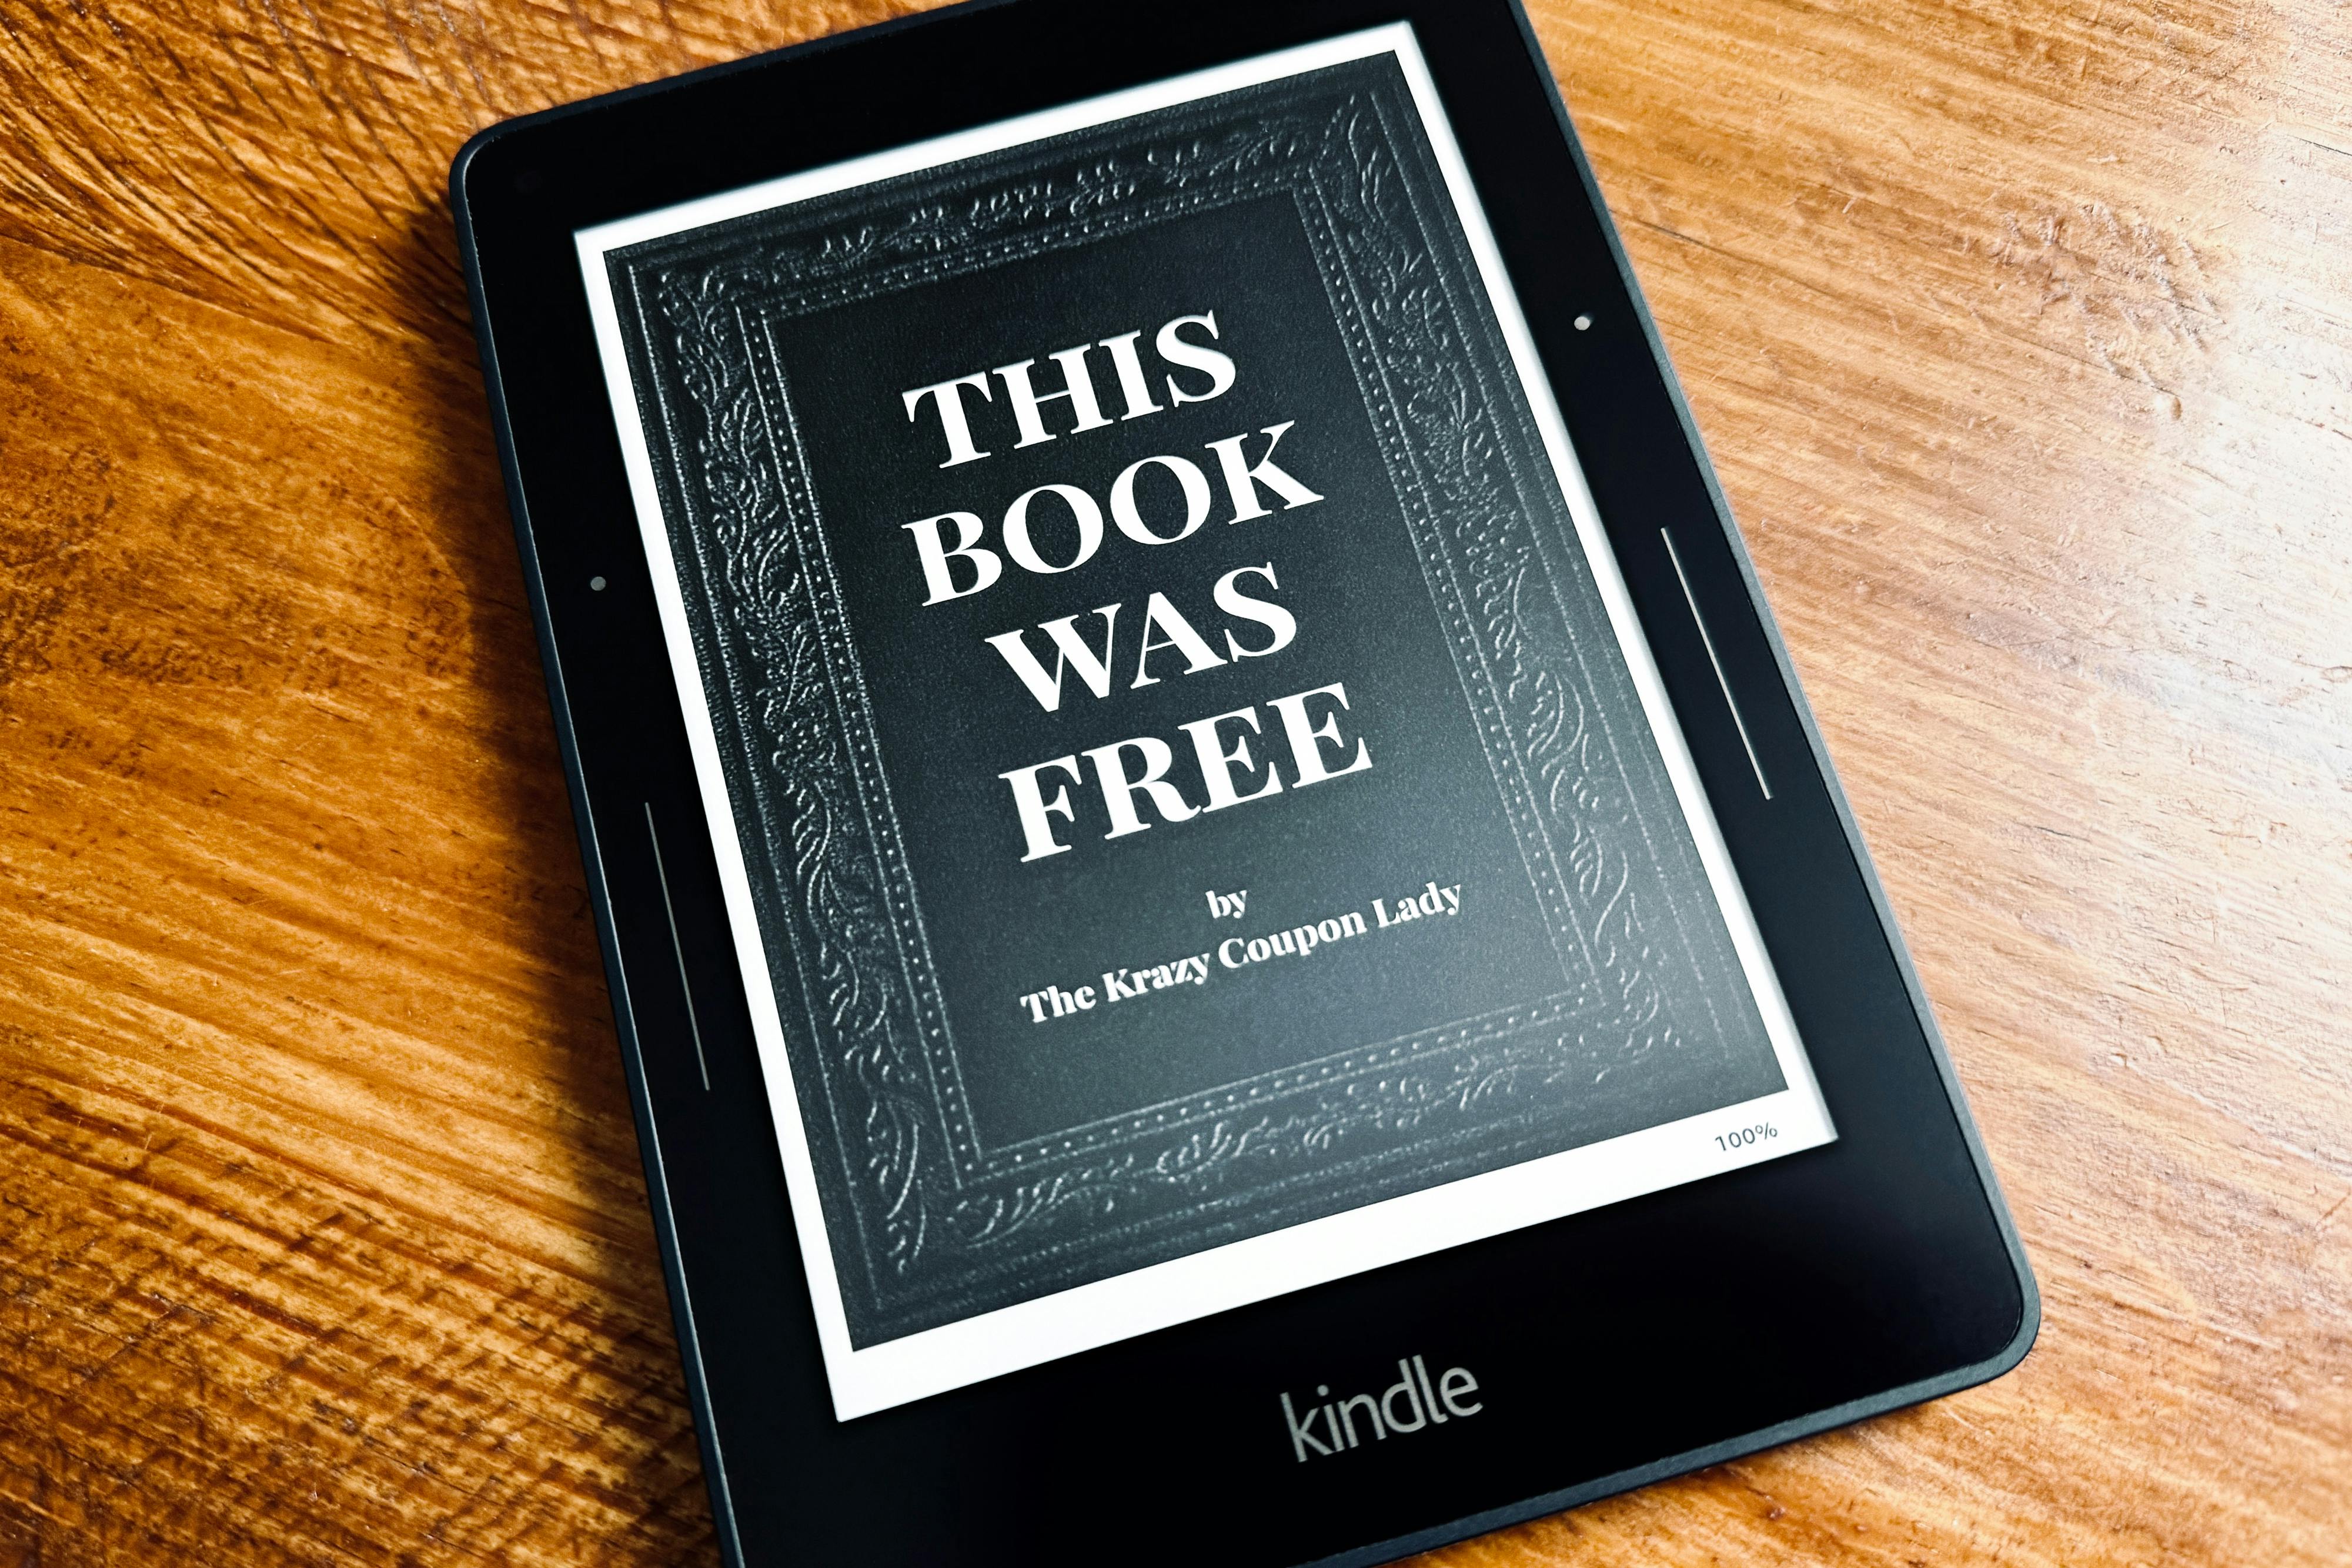 Free Kindle Books: How and where to get all your ebooks for free